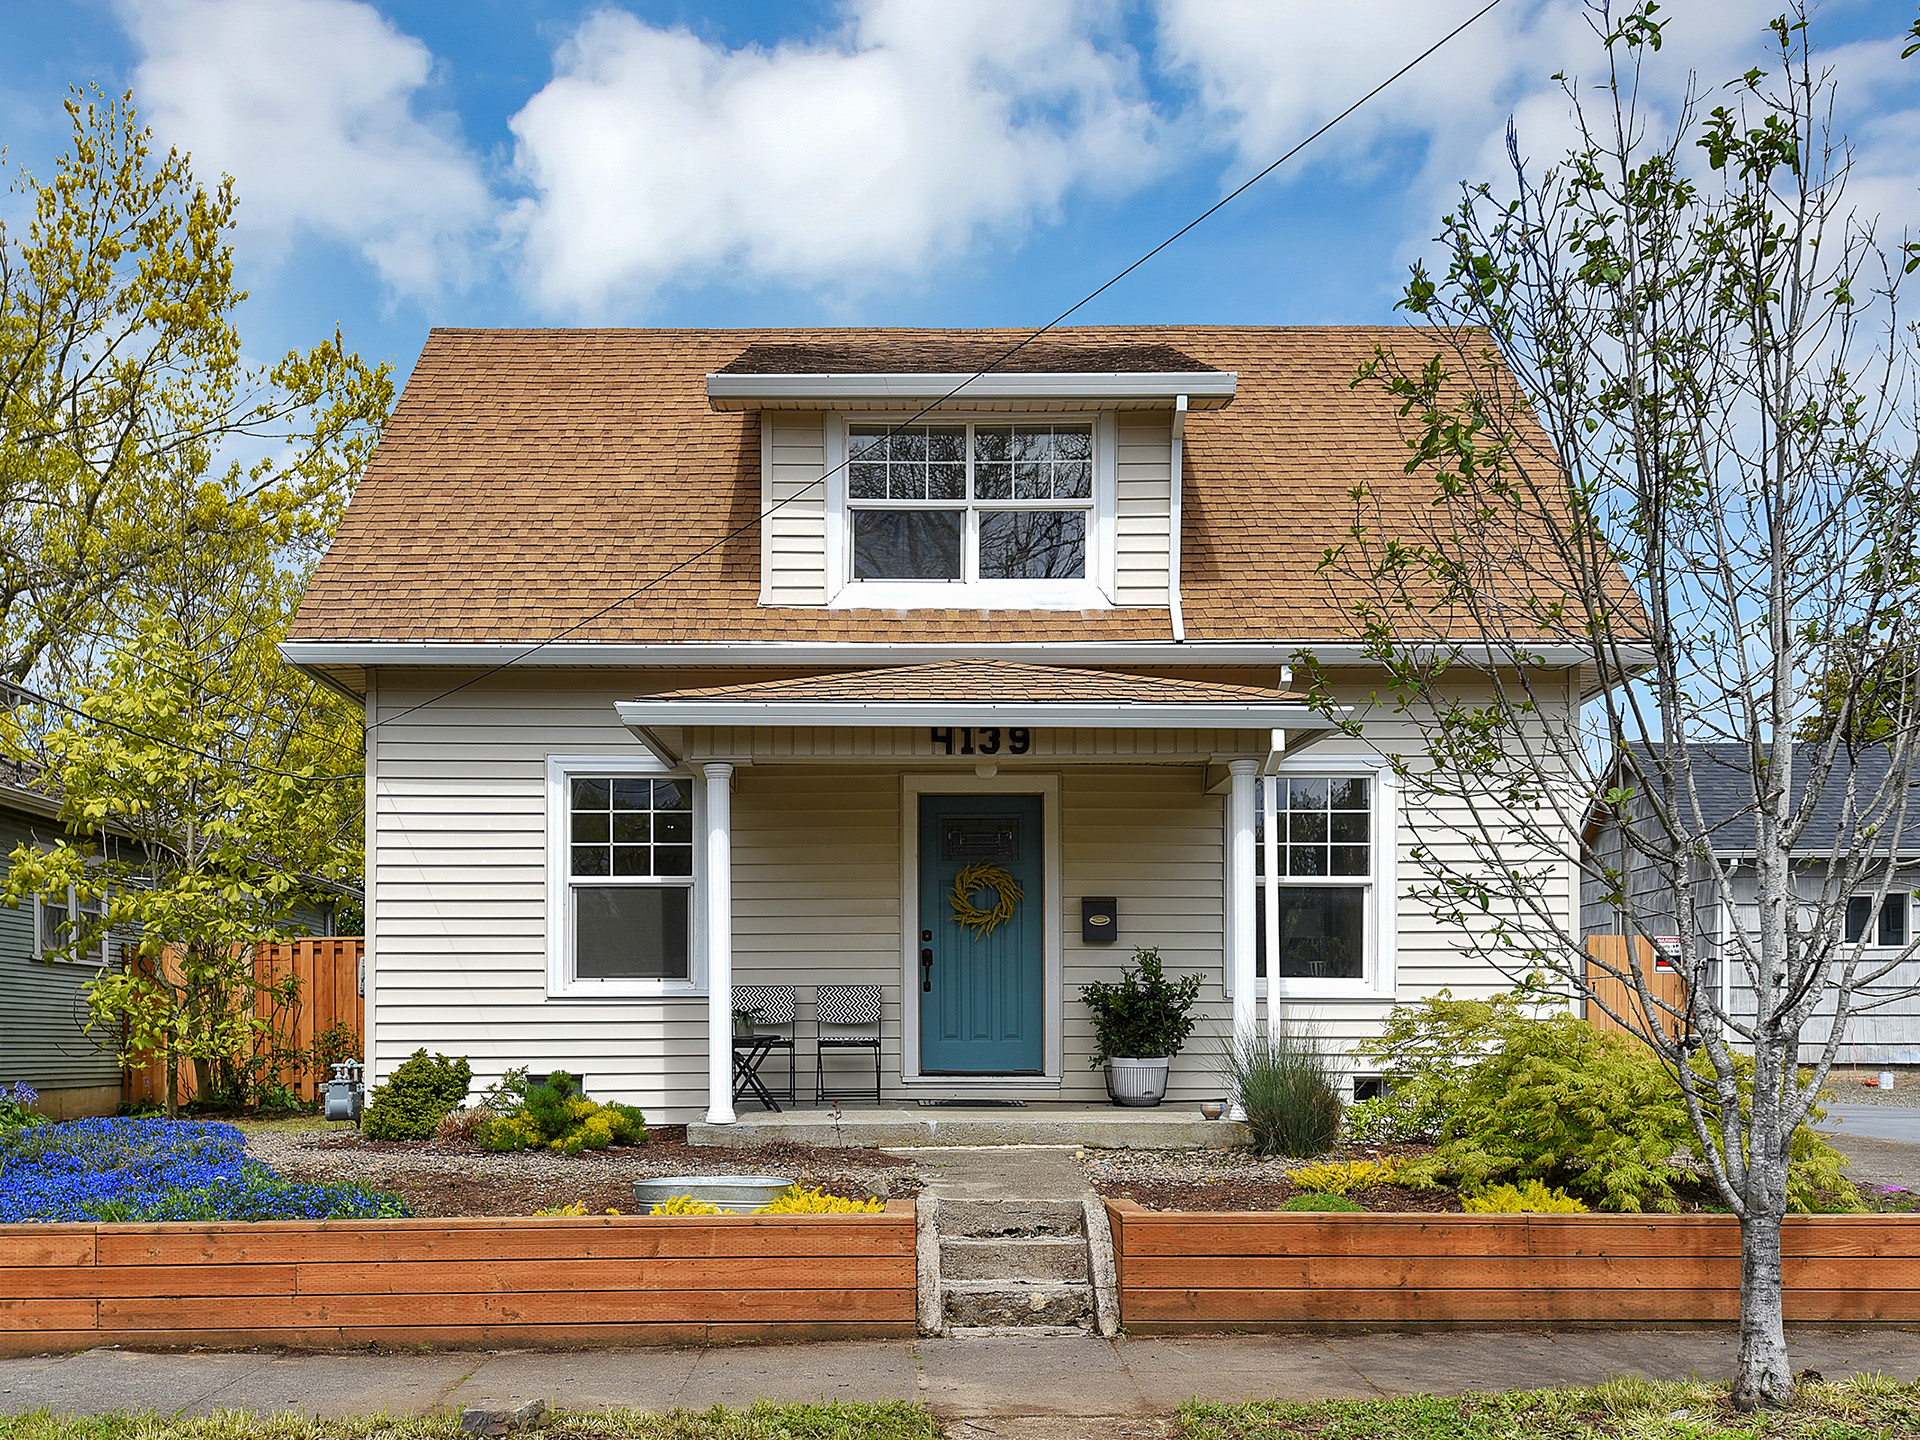 Bright and Fresh Woodstock Bungalow: $535,000